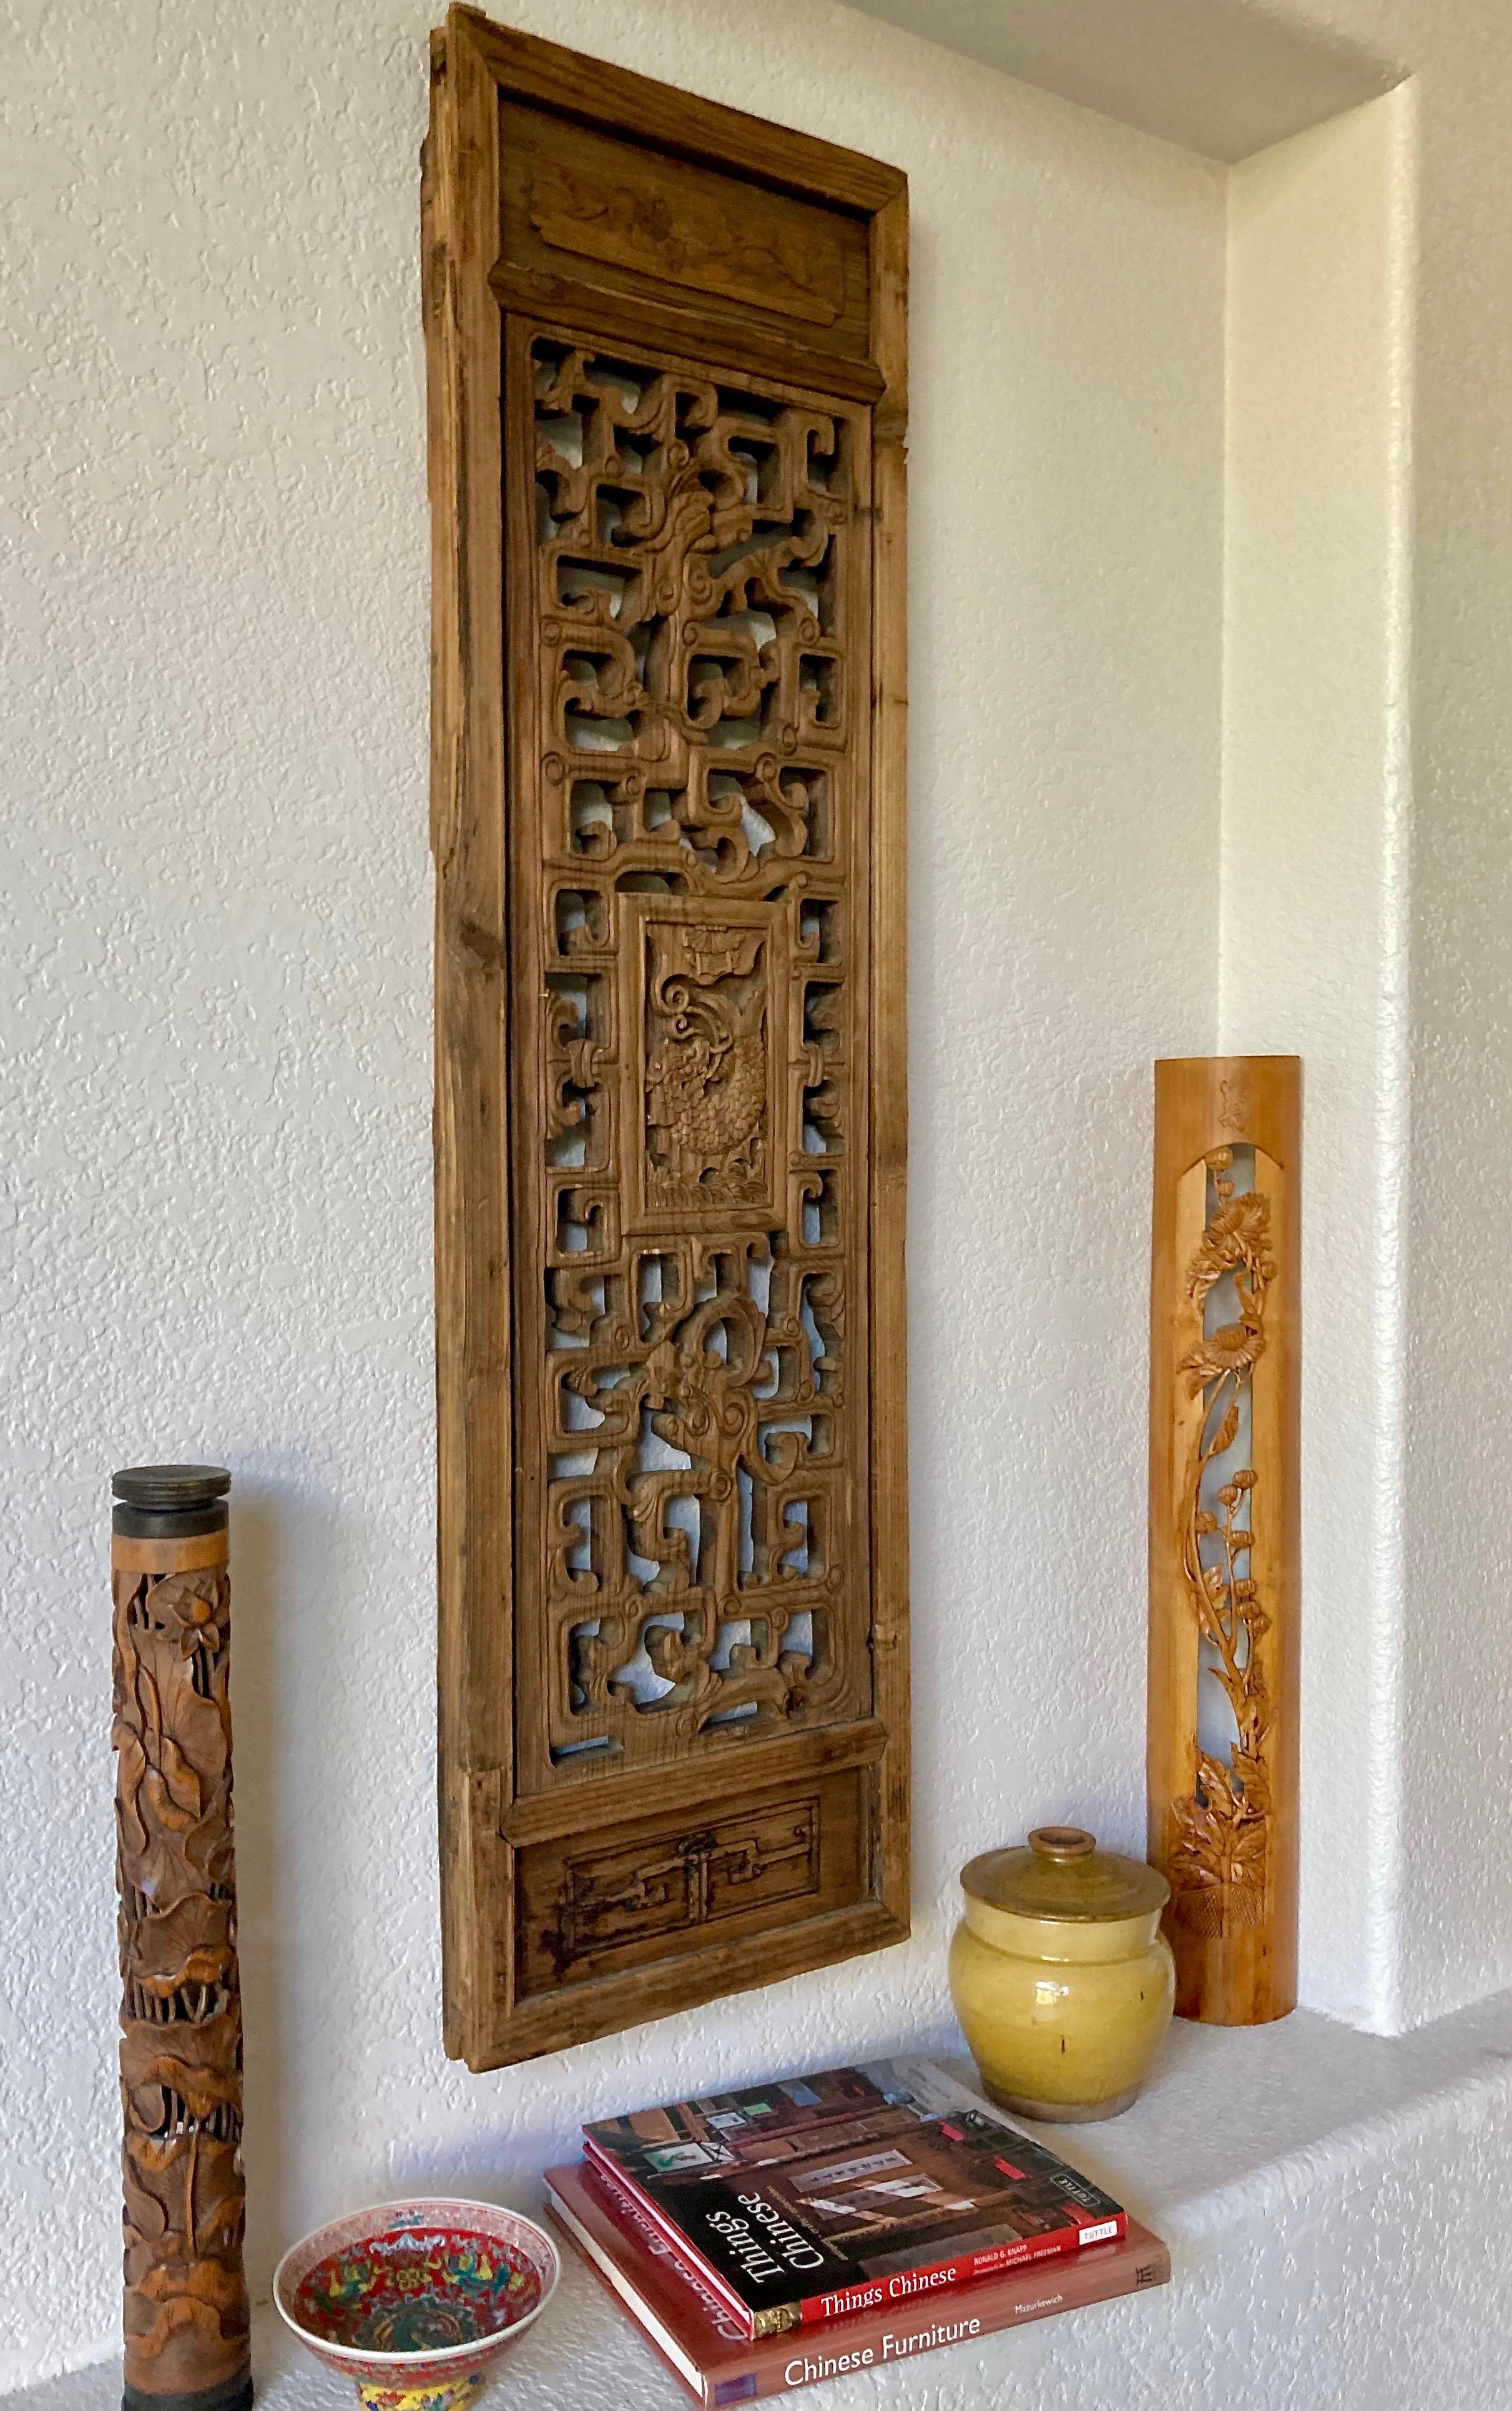 This well crafted piece includes a rectangular center carving with a mythological fish creature and a surrounding dragon motif. Carved from a solid piece of wood with a thick mortise and tenon joined frame.